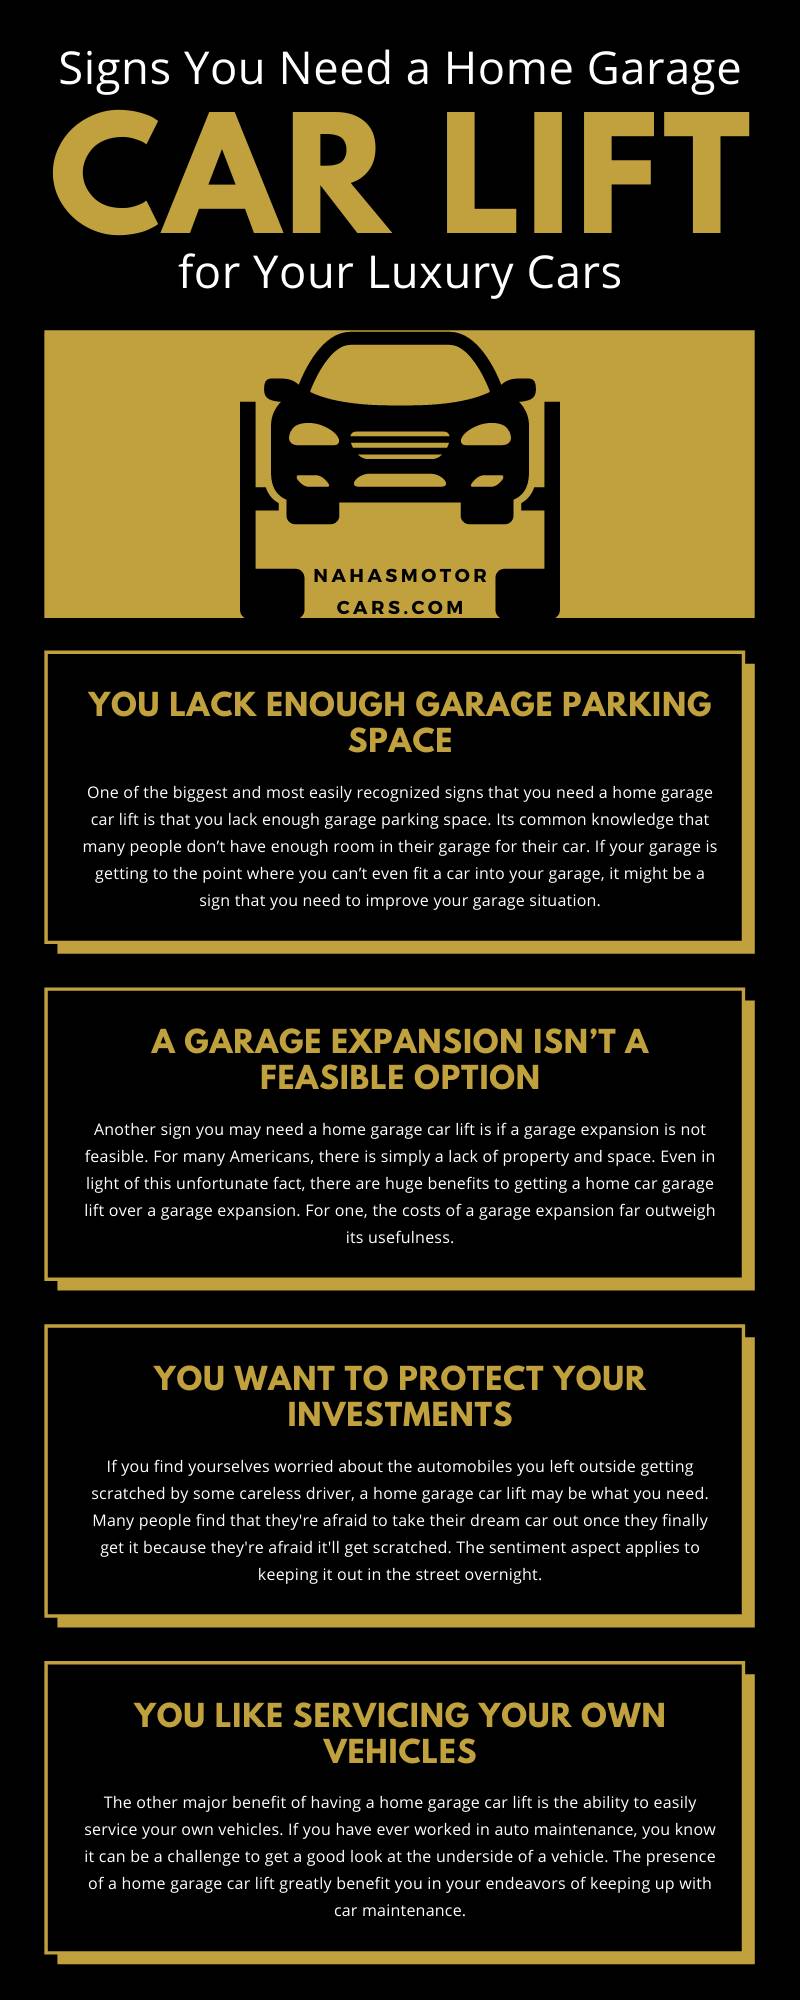 Signs You Need a Home Garage Car Lift for Your Luxury Cars